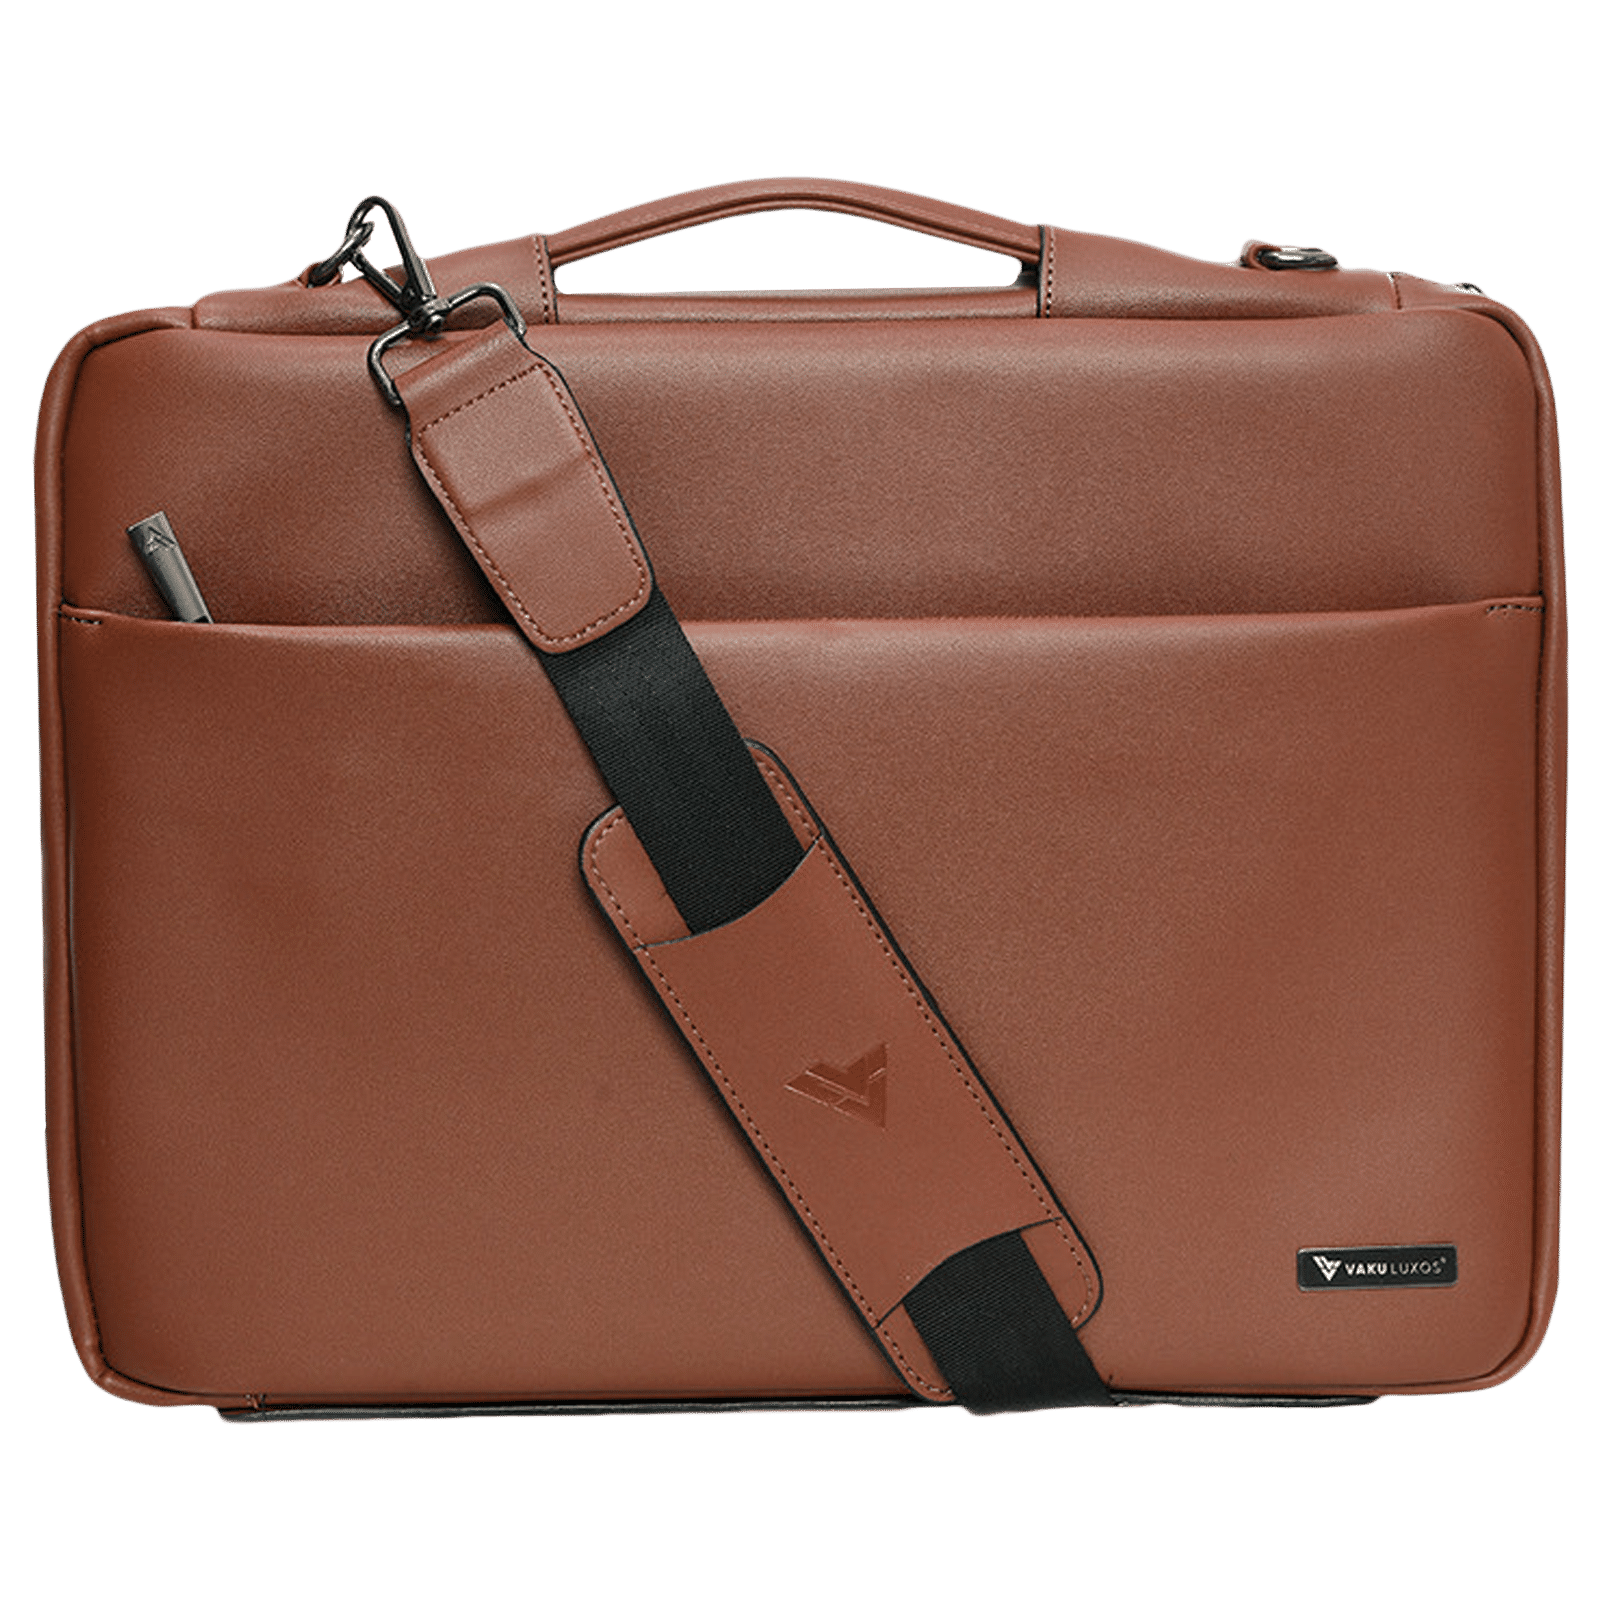 DailyObjects Tan Vegan Leather Zippered Sleeve For LaptopMacBook 3556cm  14 Buy At DailyObjects